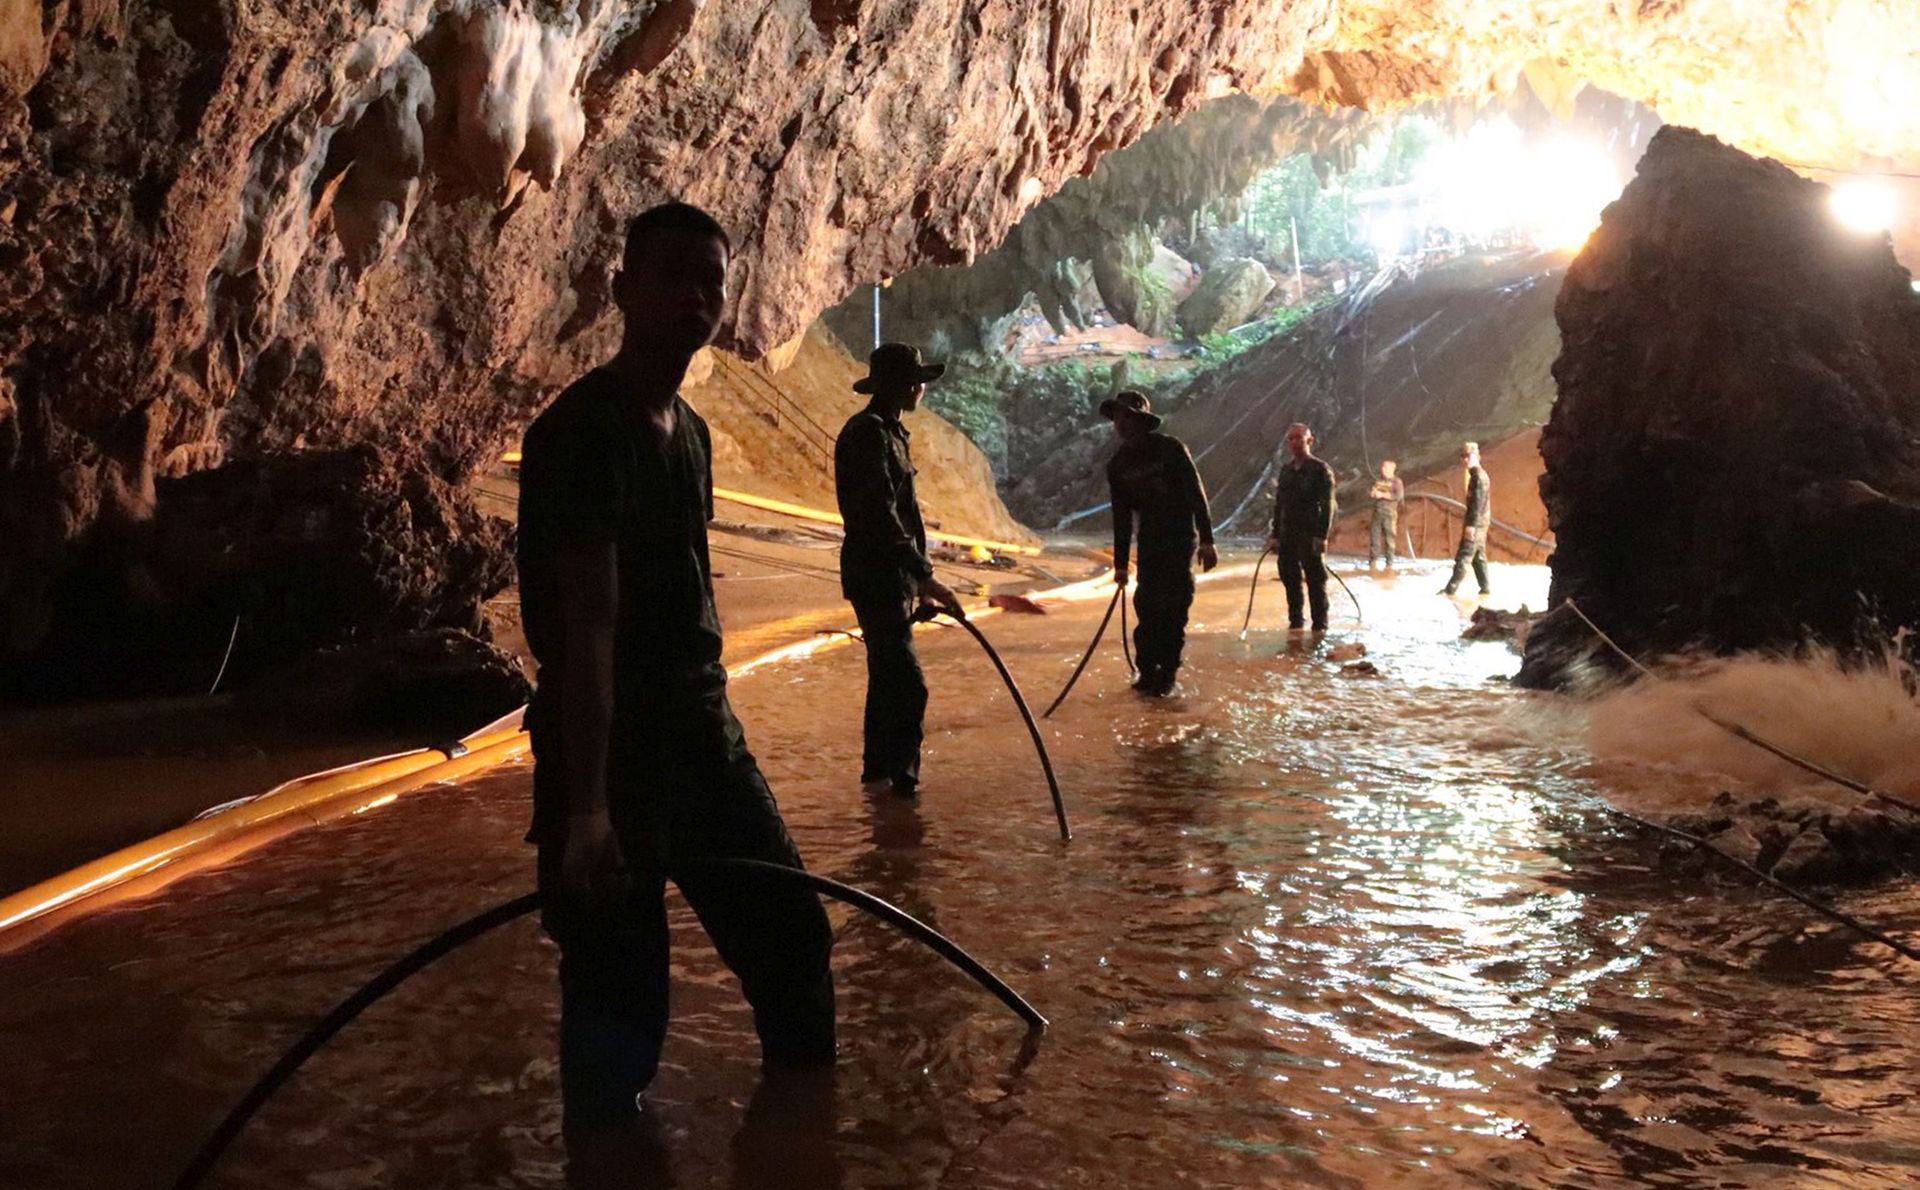 epa07662801 (FILE) - A handout photo made available by the Thai Royal Navy shows Thai military personnel inside a cave complex during the ongoing rescue operations for the youth soccer team and their assistant coach, at Tham Luang cave in Khun Nam Nang Non Forest Park, Chiang Rai province, Thailand, 07 July 2018 (reissued 20 June 2019). The Thai Wild Boar youth soccer team had spent 18 days deep inside the flooded Tham Luang cave in Thailand after becoming trapped on 23 June 2018. All of the thirteen team members were rescued in a large-scale rescue operation by 10 July 2018.  EPA/ROYAL THAI NAVY HANDOUT ATTENTION: This Image is part of a PHOTO SET HANDOUT EDITORIAL USE ONLY/NO SALES *** Local Caption *** 54472139